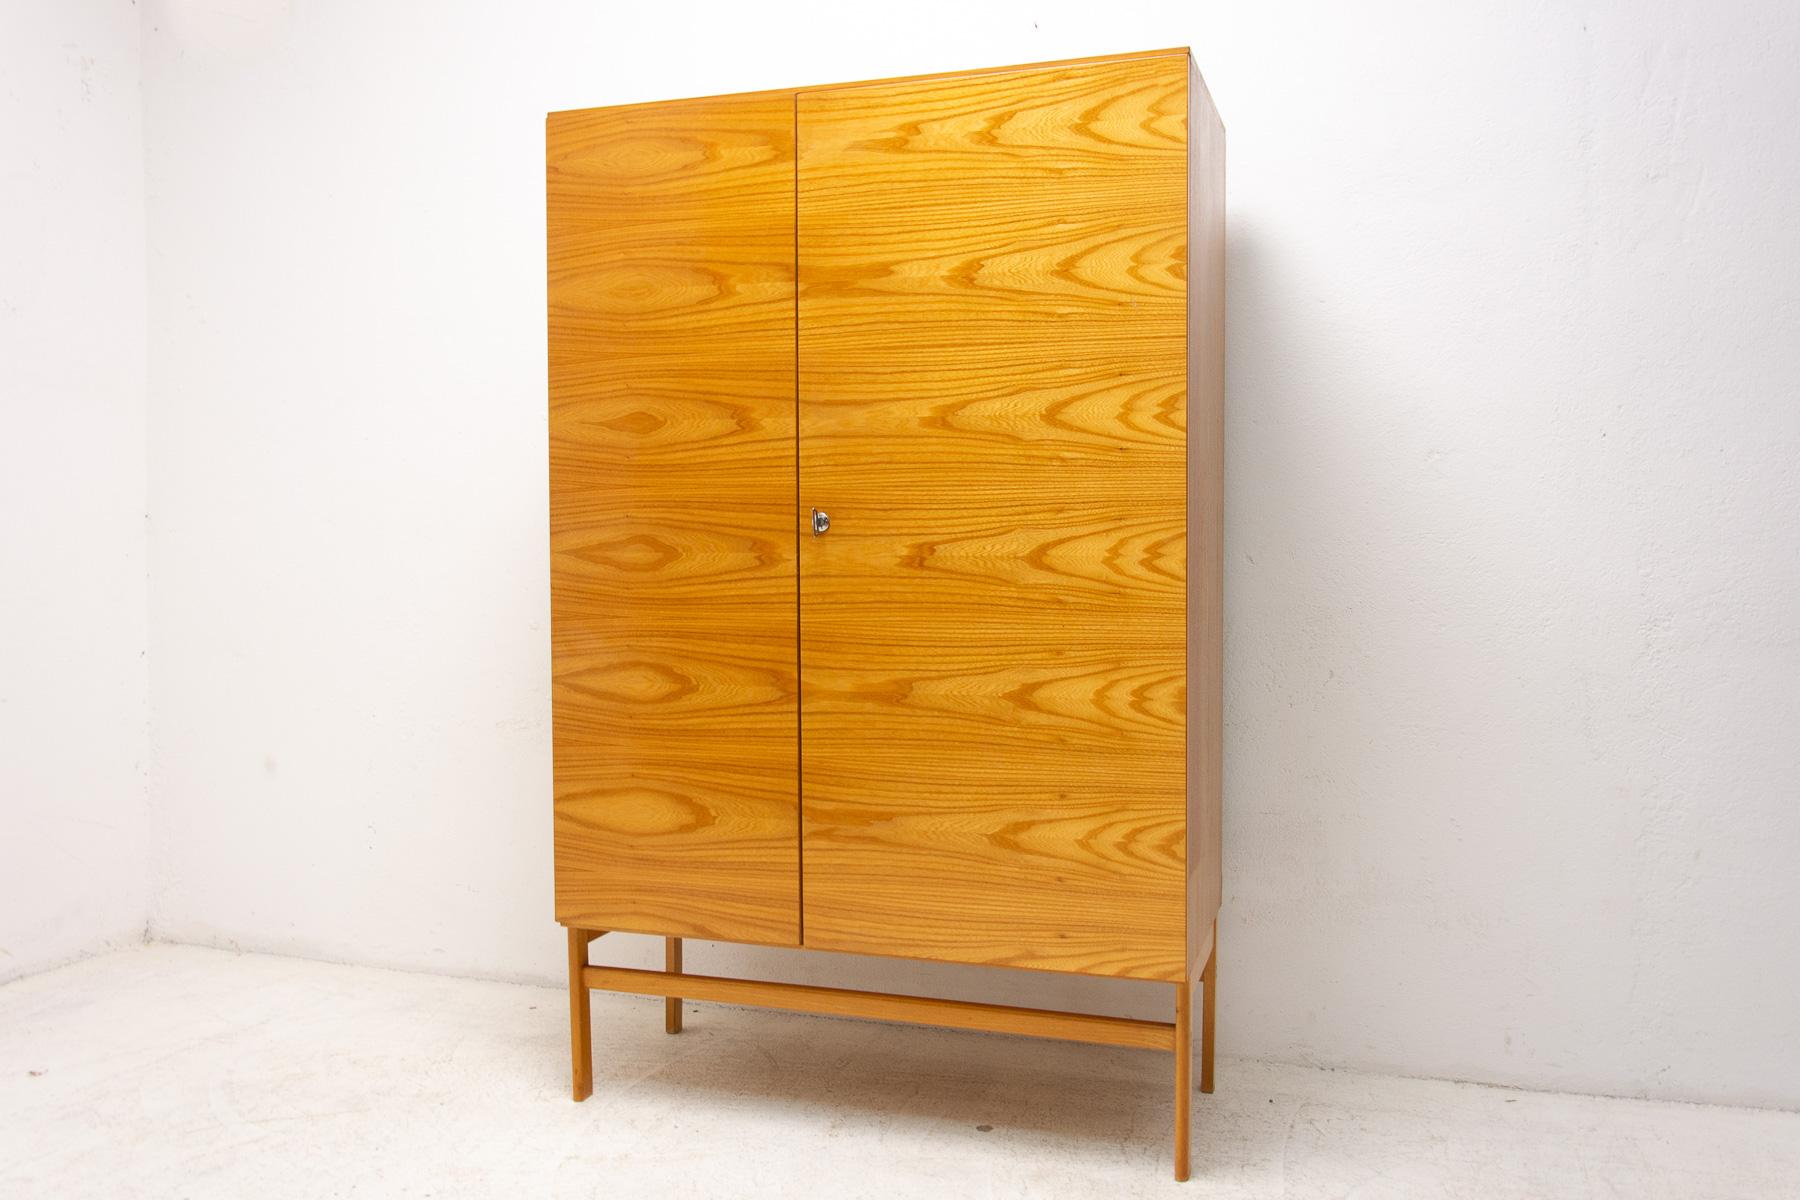 This Elegant vintage wardrobe was made by Jitona company in the former Czechoslovakia in the 1970´s. There is one clothes rail inside and a storage space next to it. In very good Vintage condition, showing slight signs of age and using. It´s made of